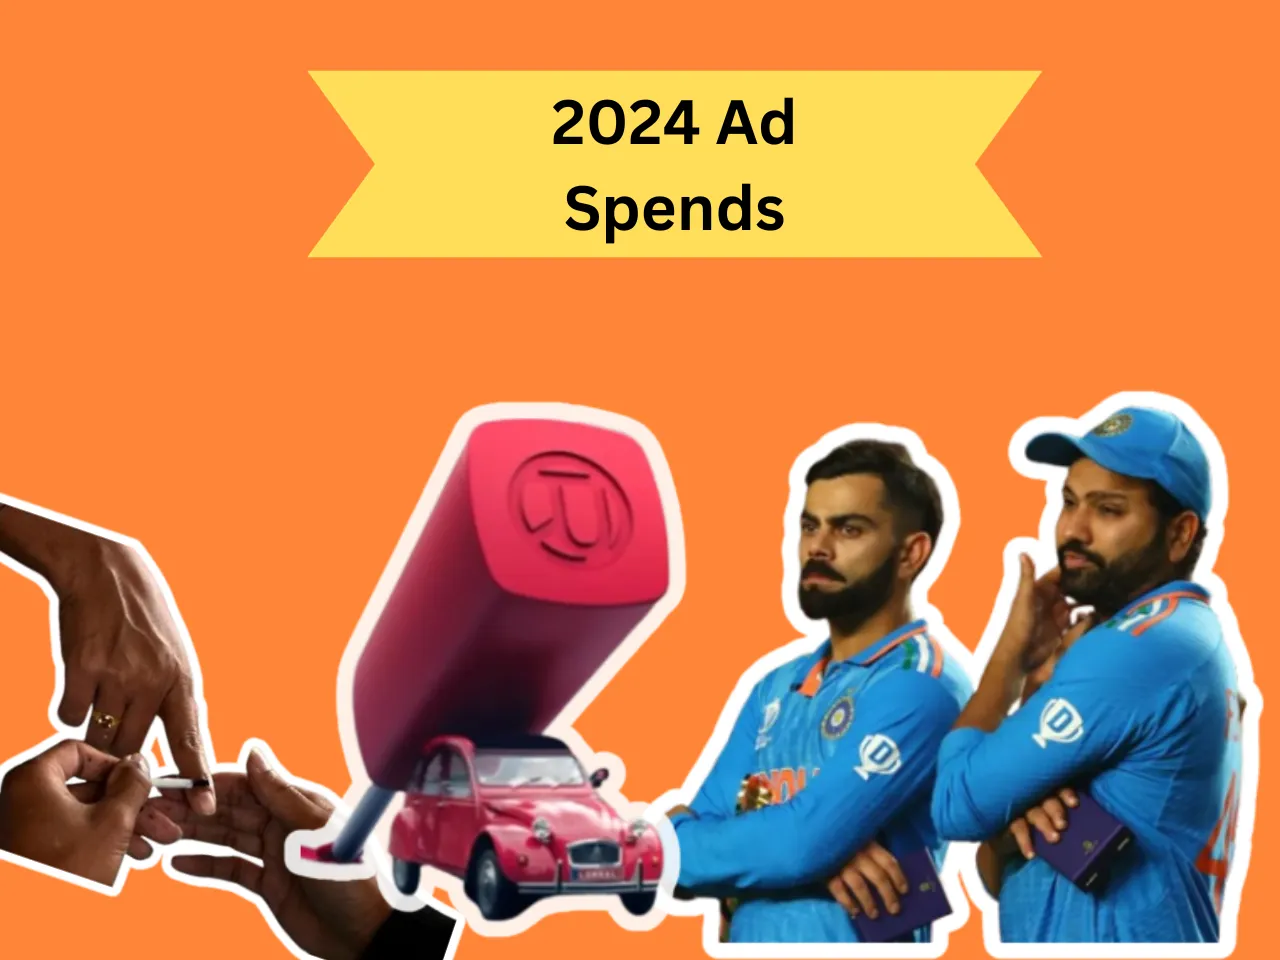 ad spends in 2024